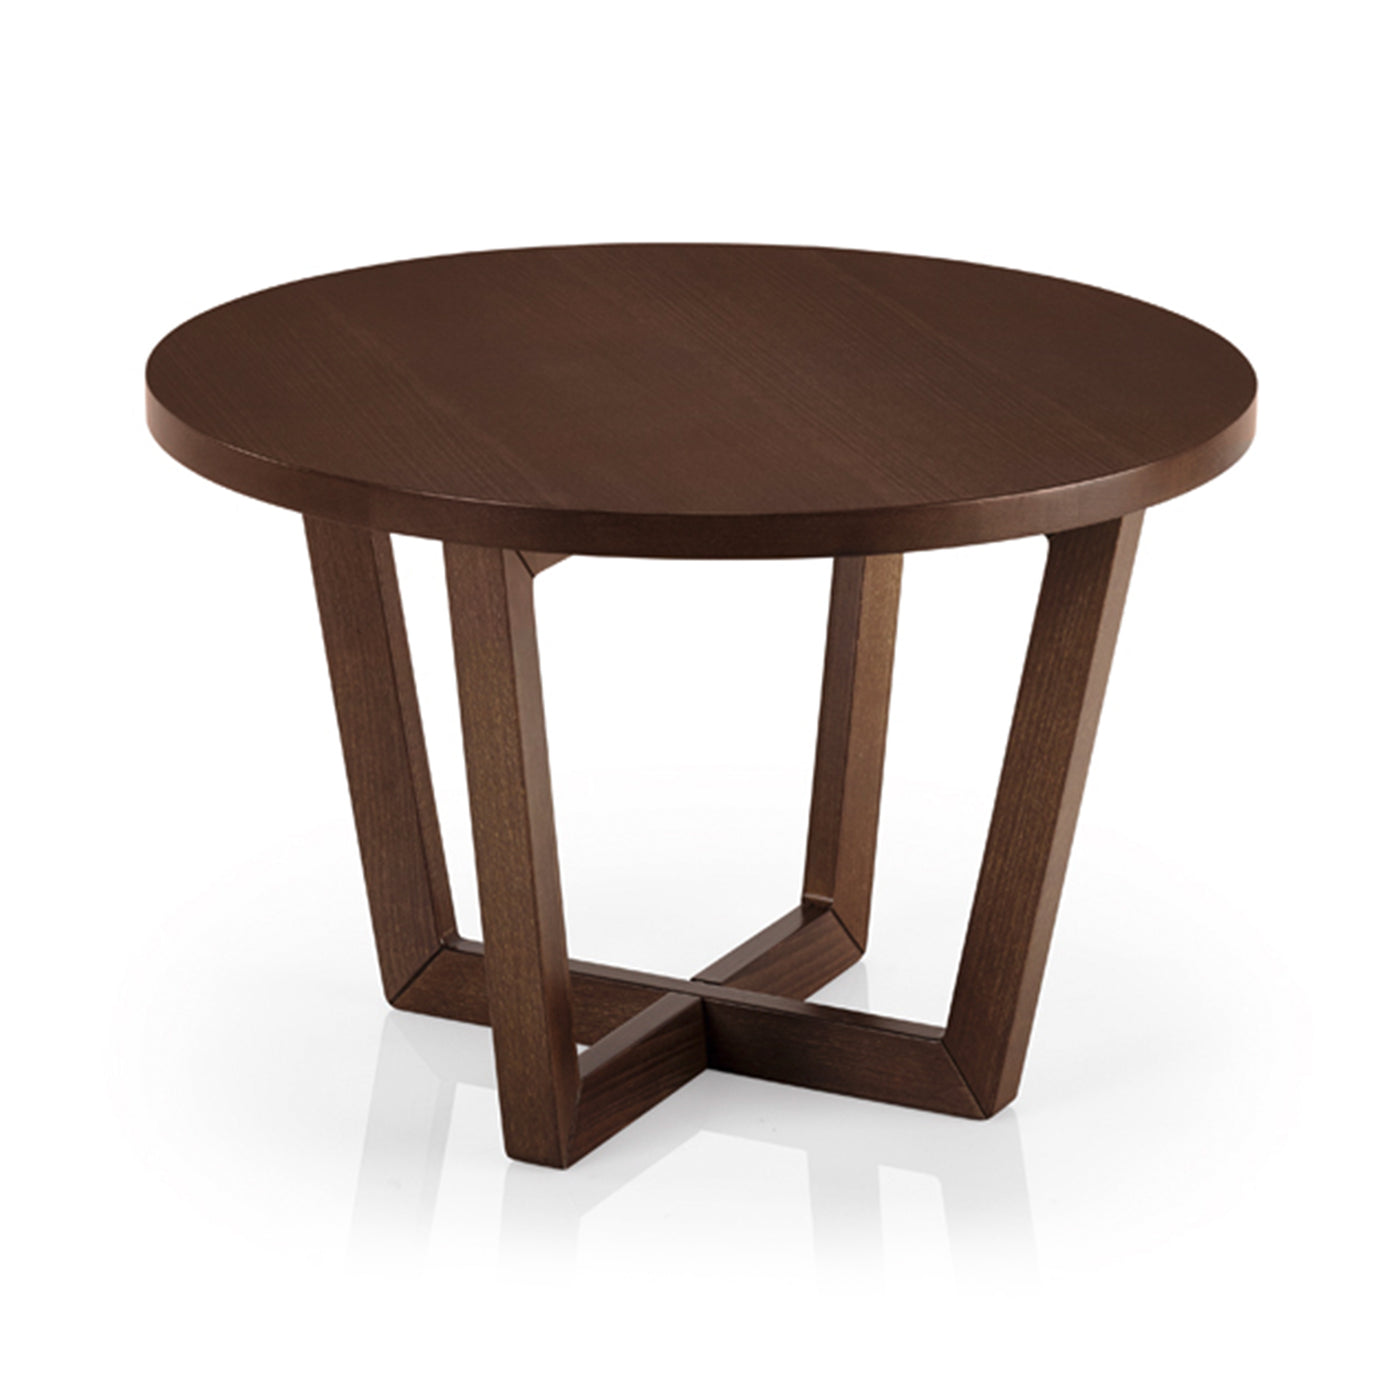 Christabel 400 Coffee Table